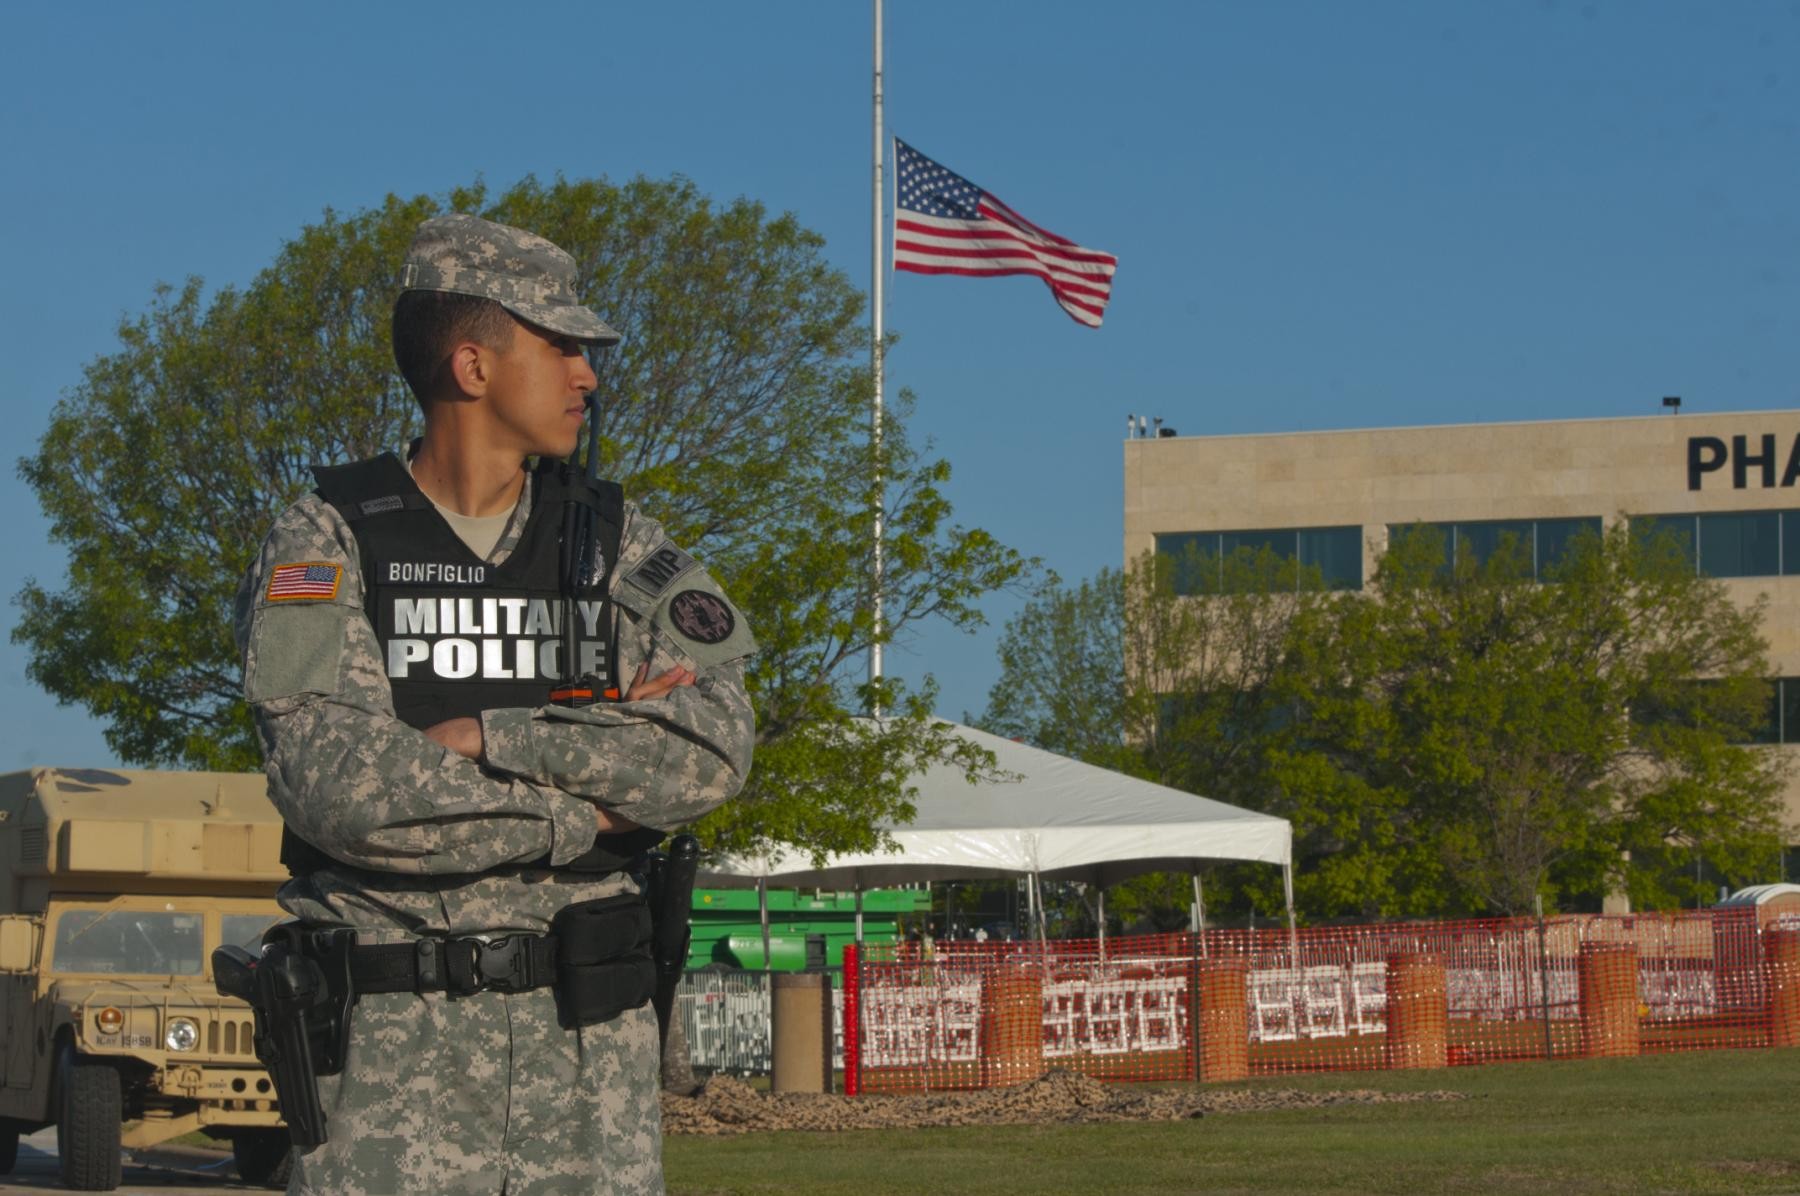 Fort Hood shooting victims honored at memorial ceremony Article The